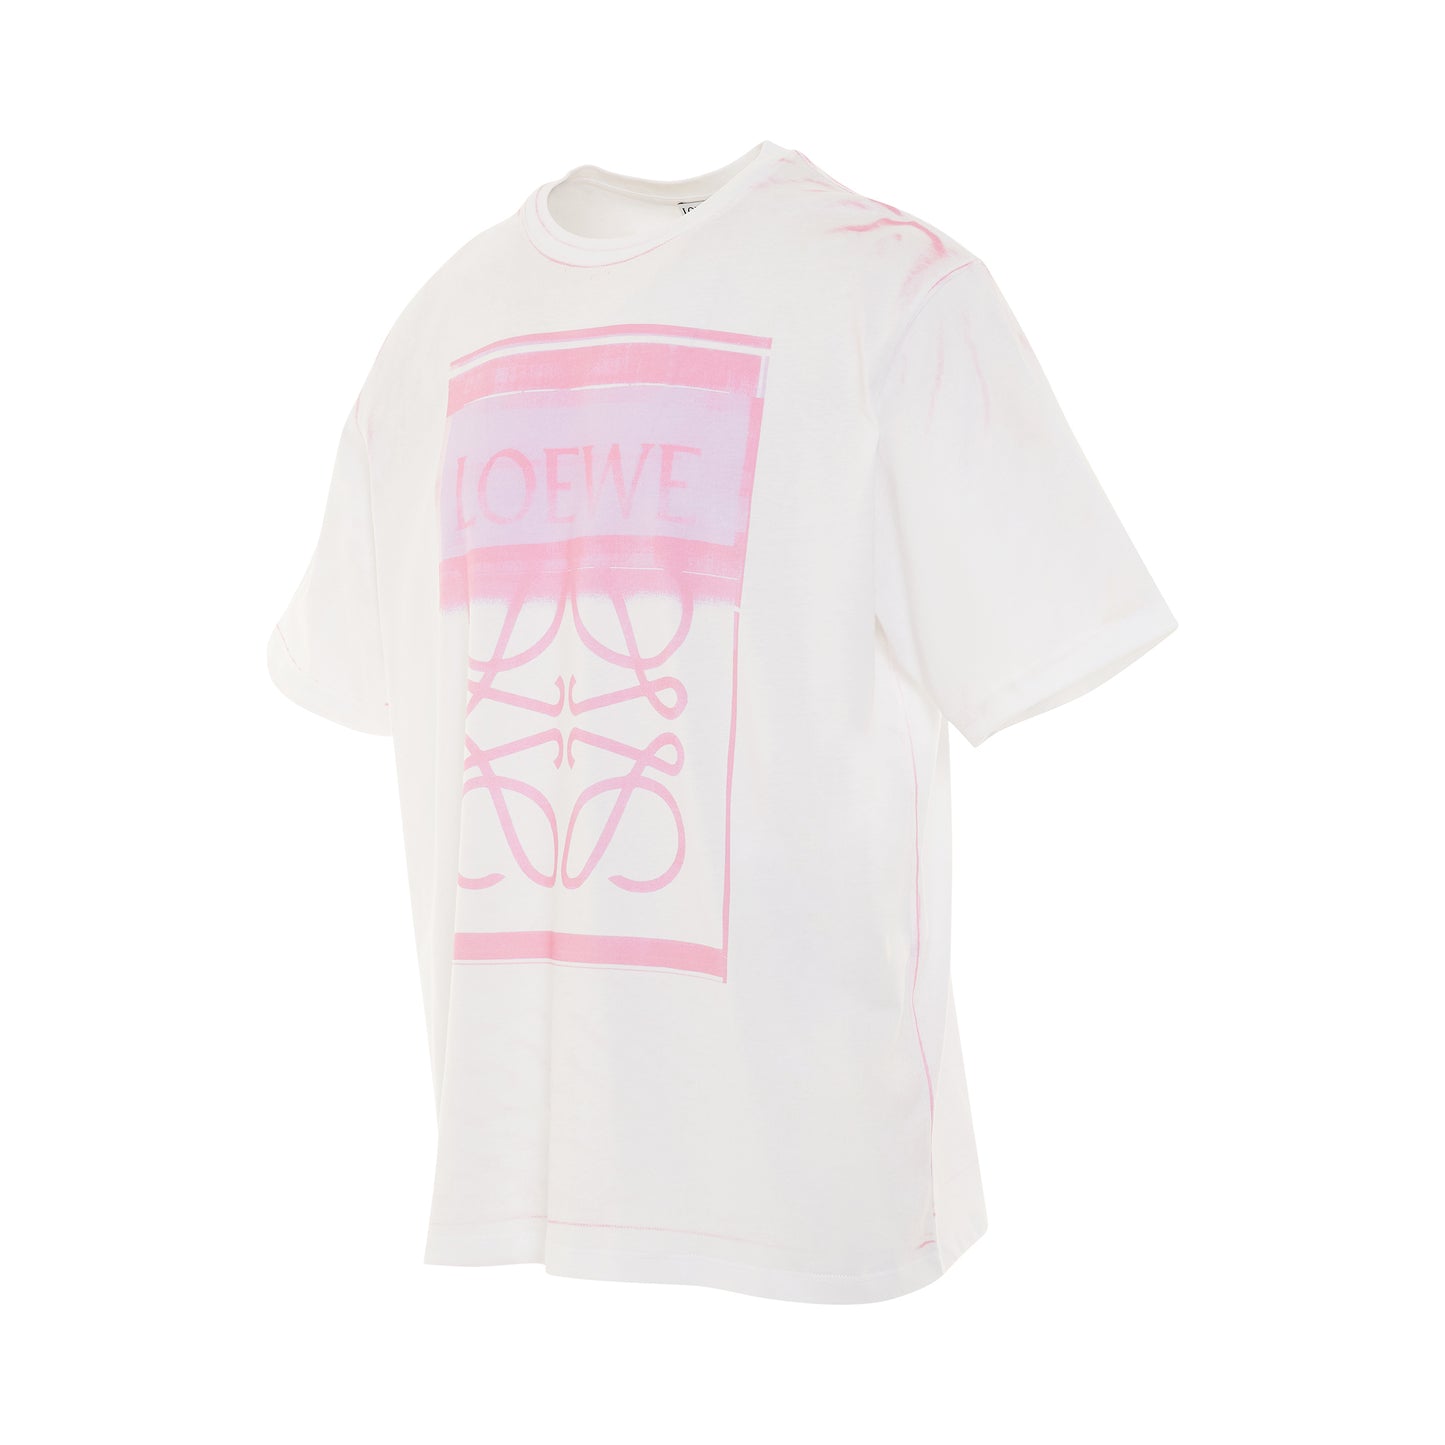 Photocopy Anagram T-Shirt in White/Pink